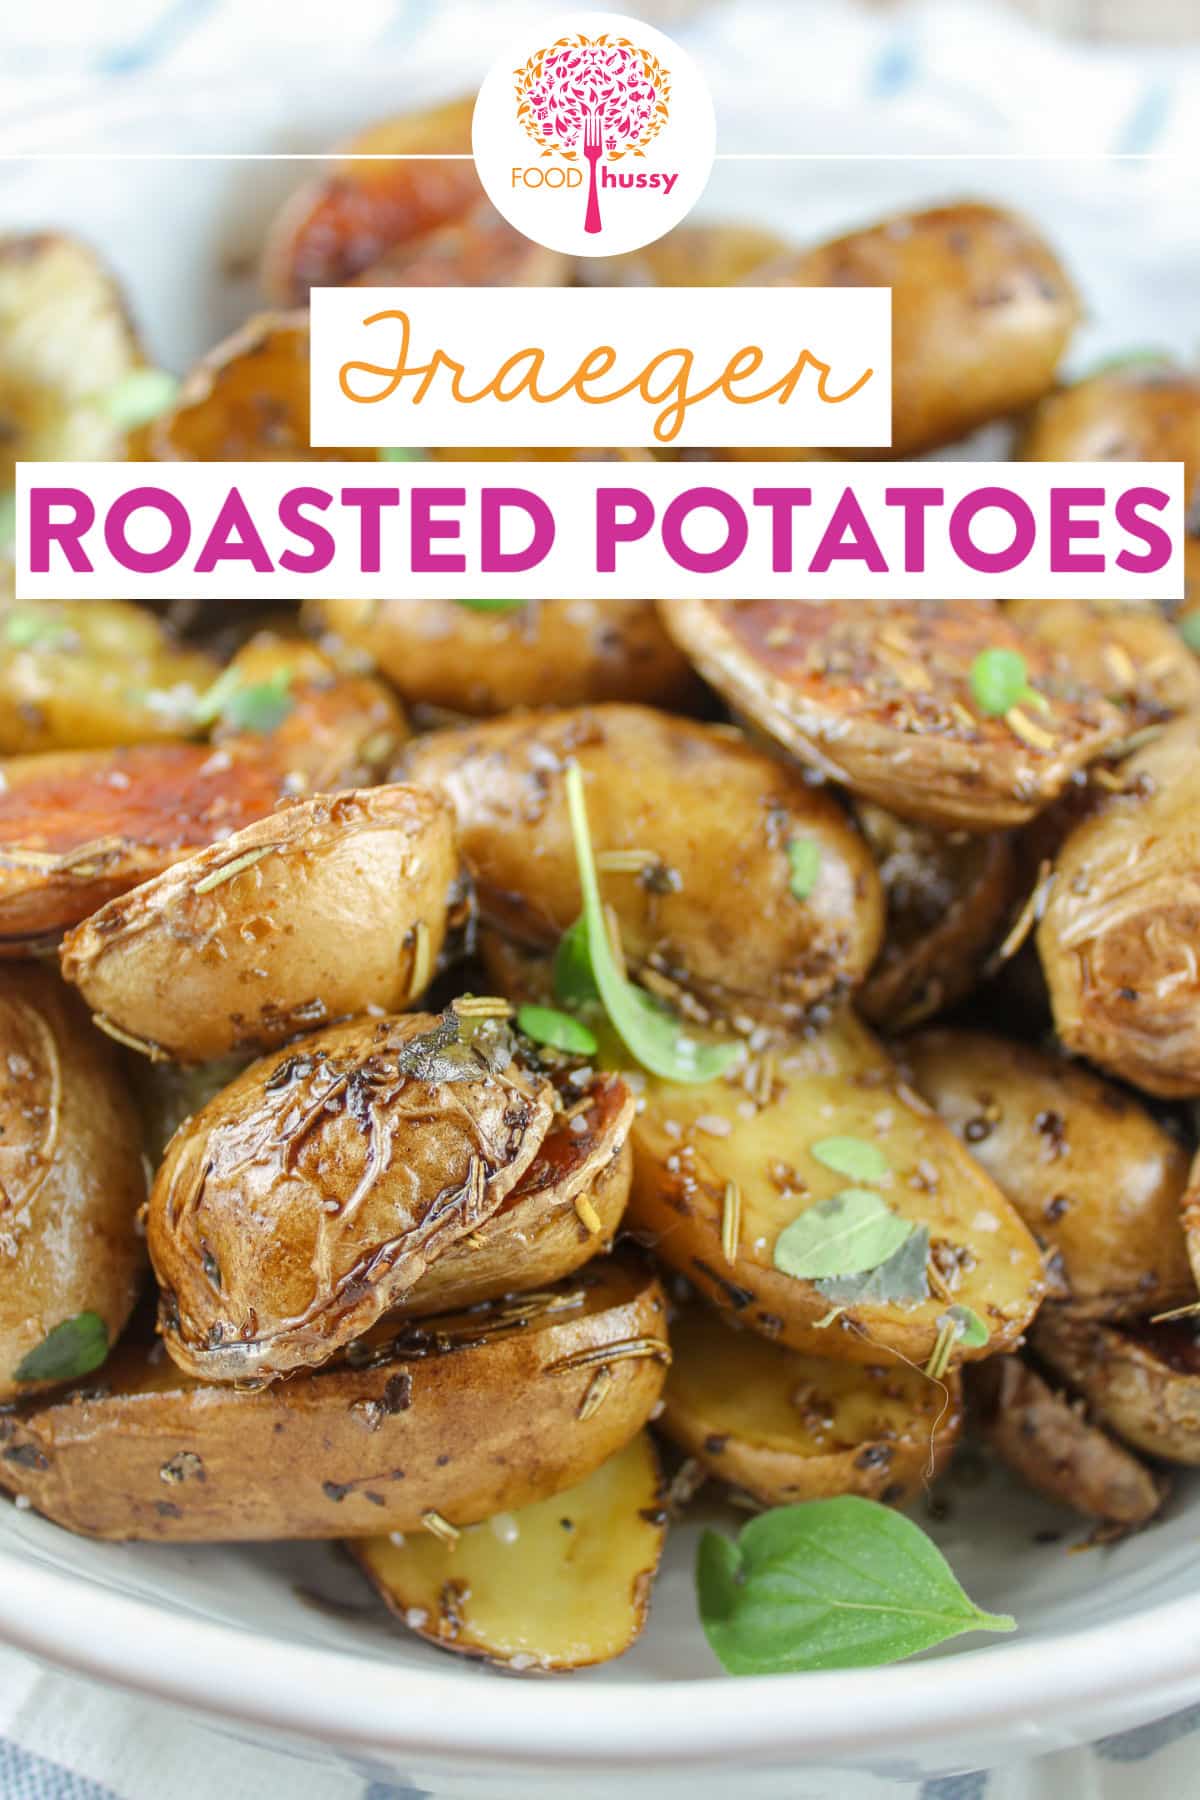 Traeger Roasted Potatoes are a delicious smoky side dish great for any weeknight meal!  A little olive oil and fresh herbs are all you need! via @foodhussy